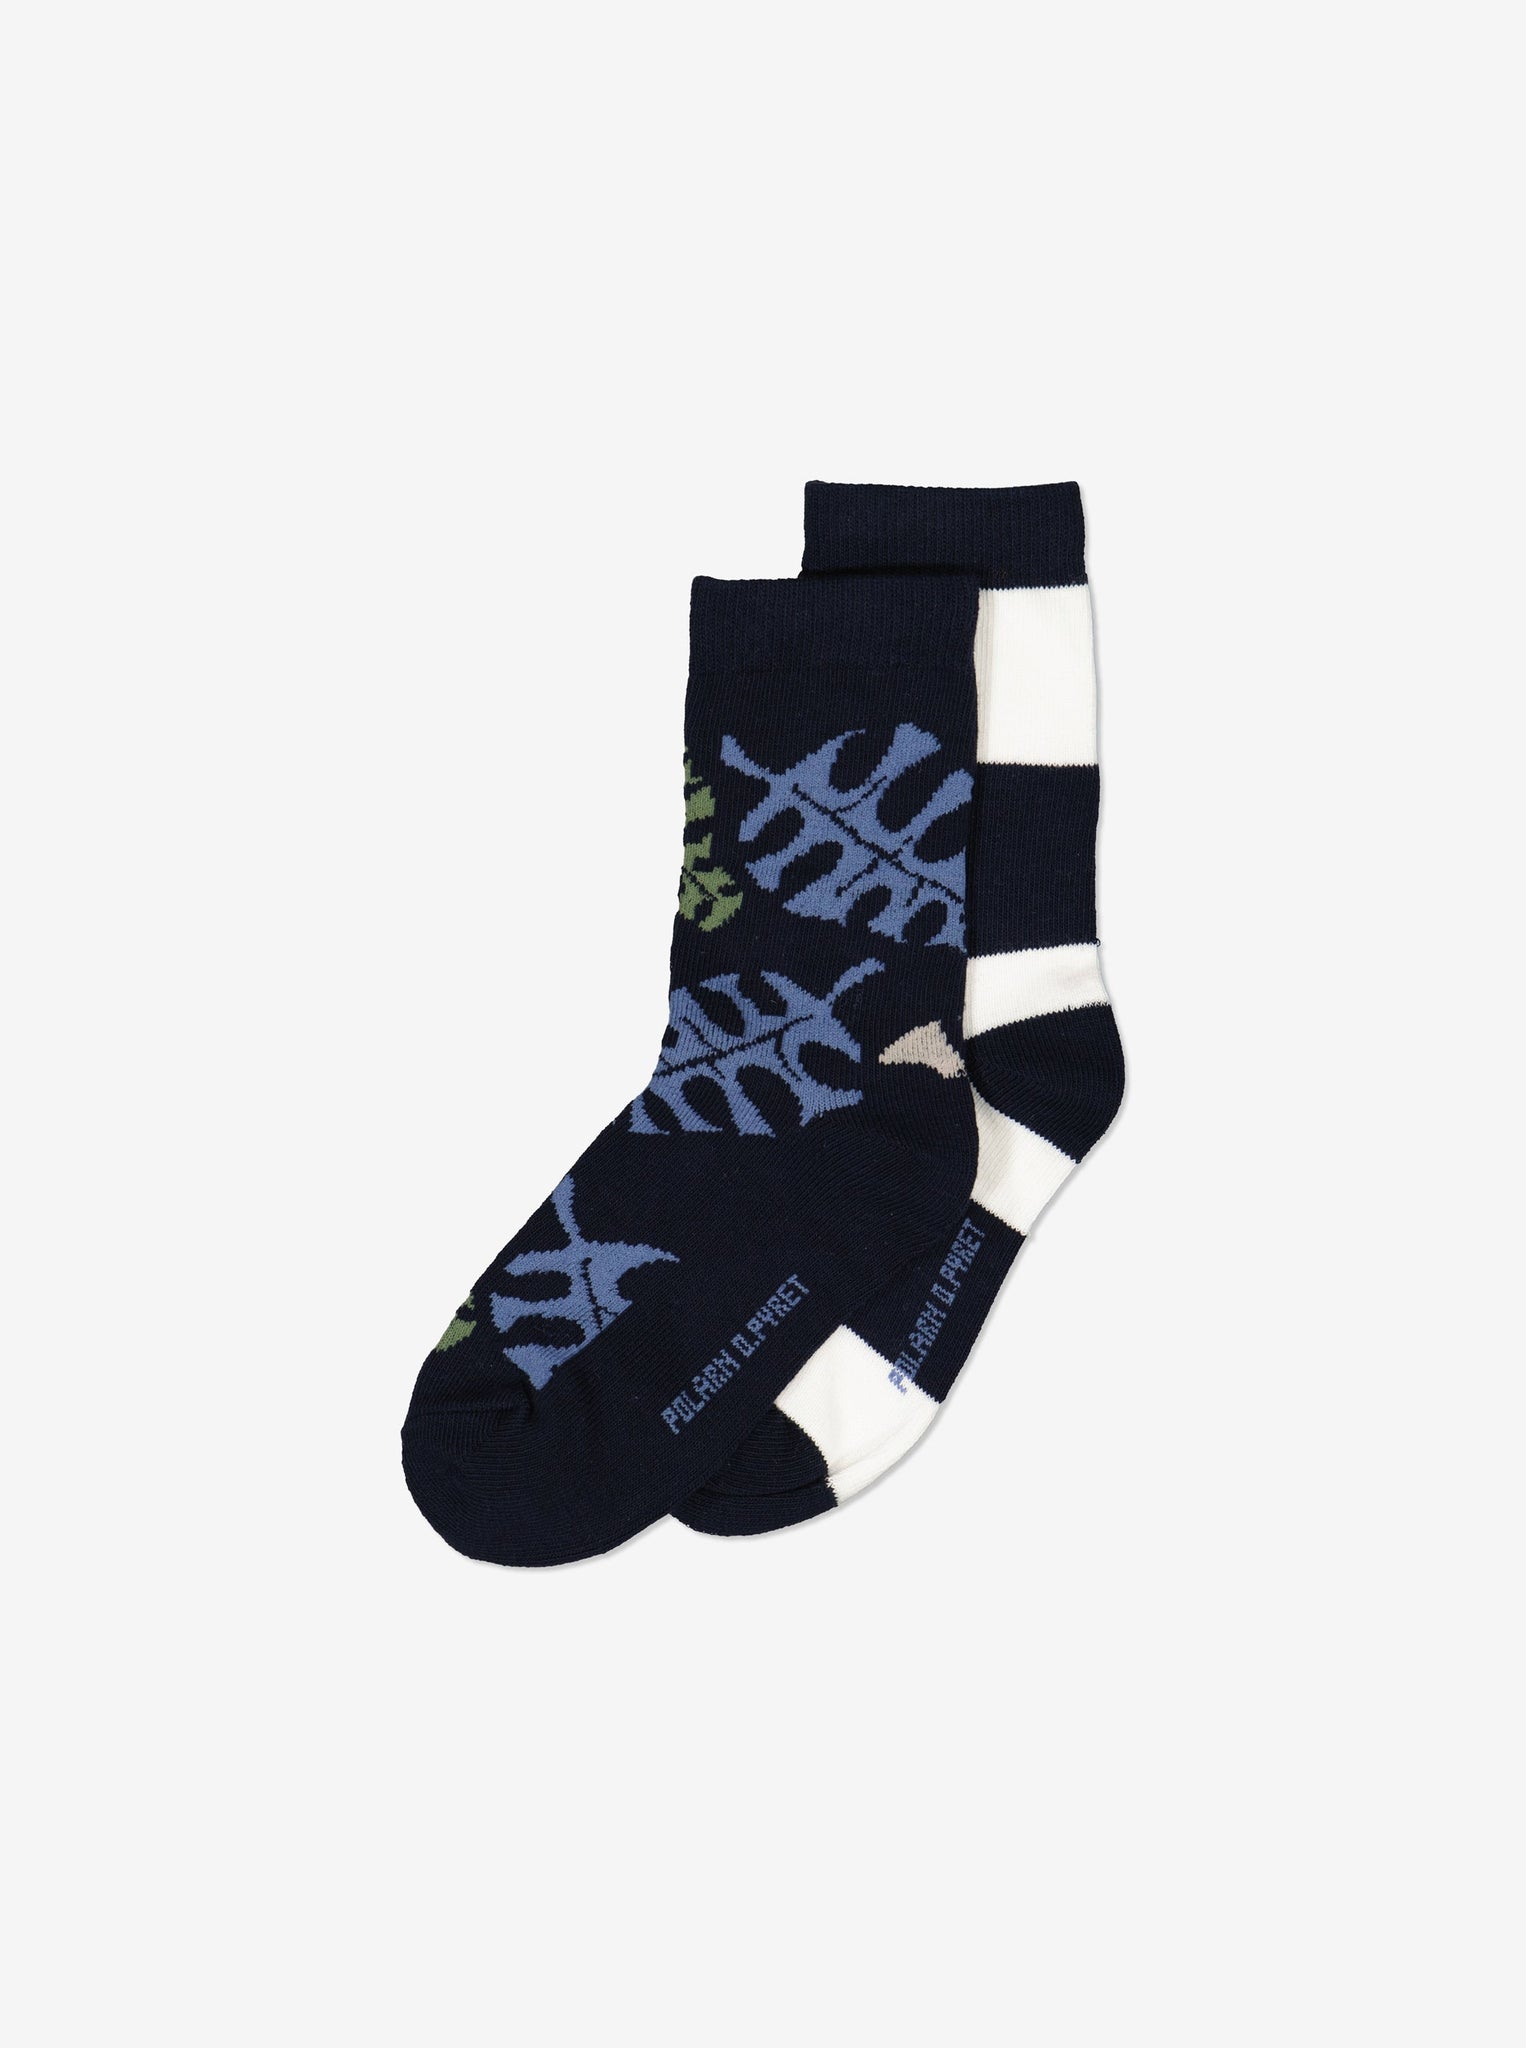  Navy Kids Socks Multipack from Polarn O. Pyret Kidswear. Made from sustainable materials.